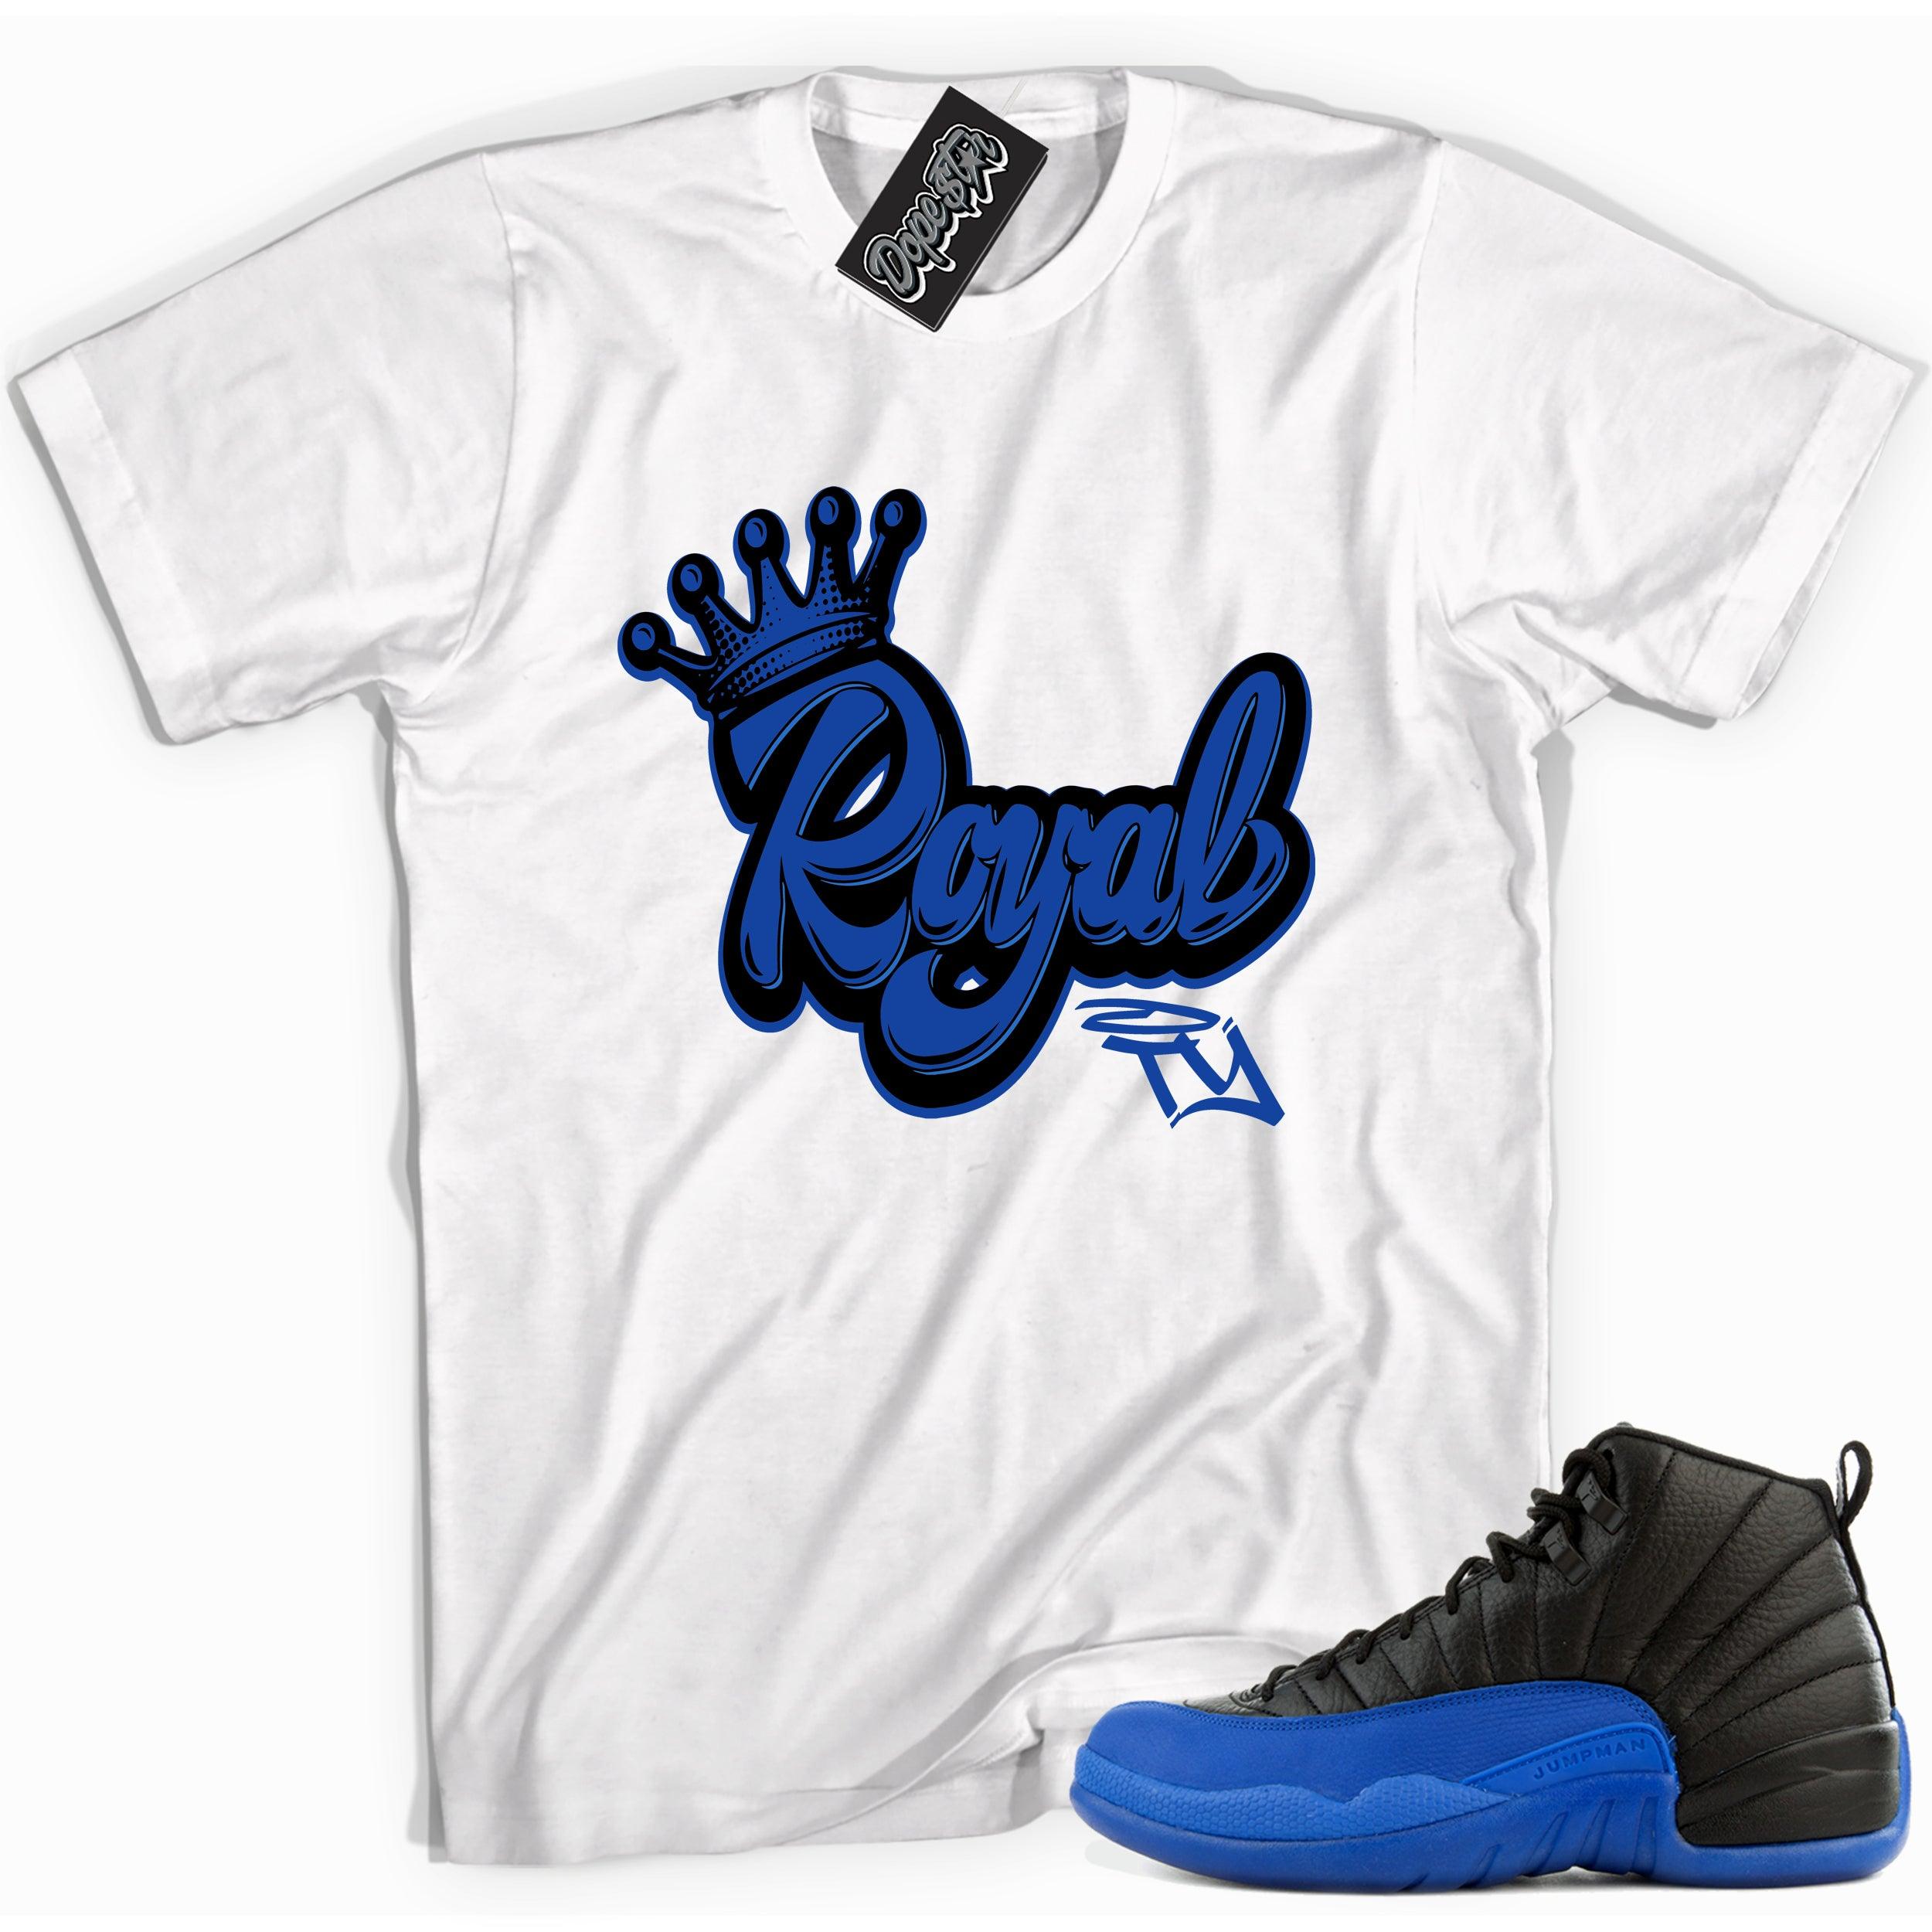 Cool white graphic tee with 'royalty' print, that perfectly matches Air Jordan 12 Retro Black Game Royal sneakers.